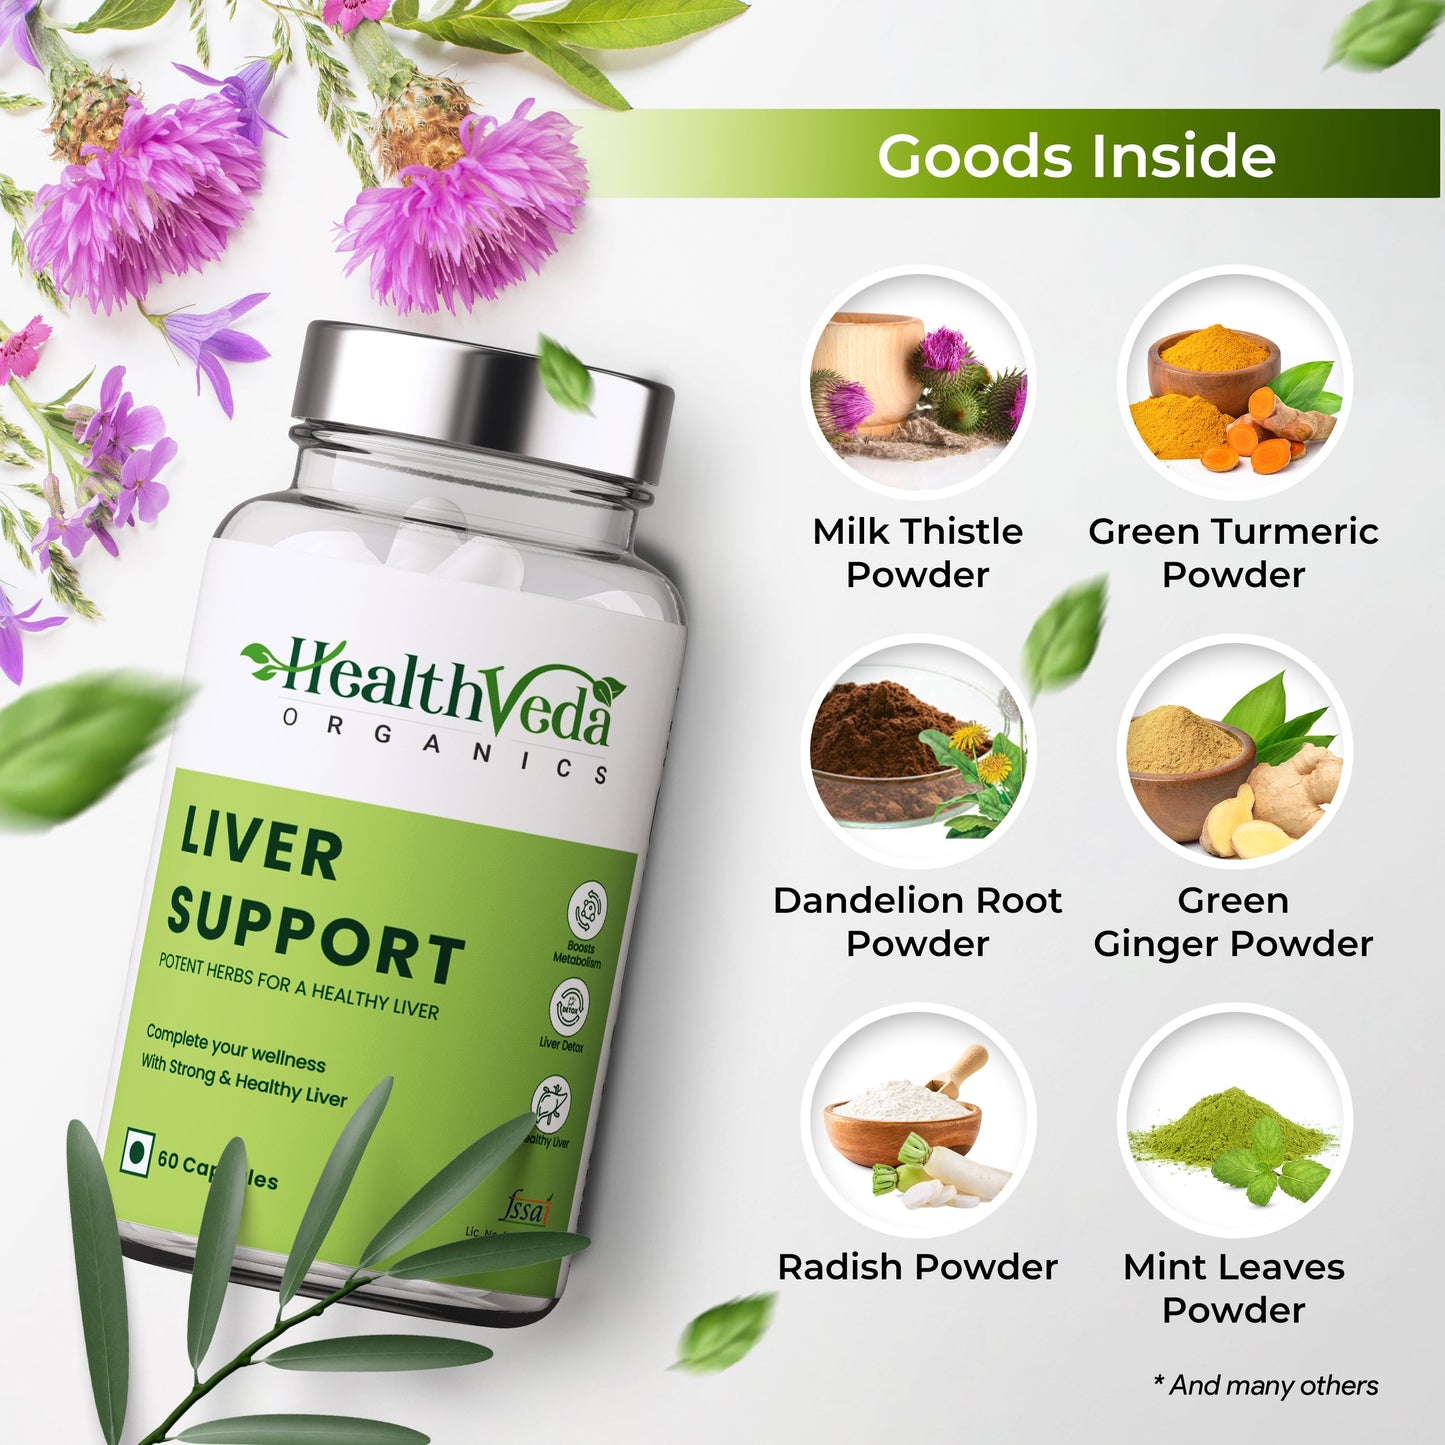 Health Veda Organics Plant Based Liver Support Capsules